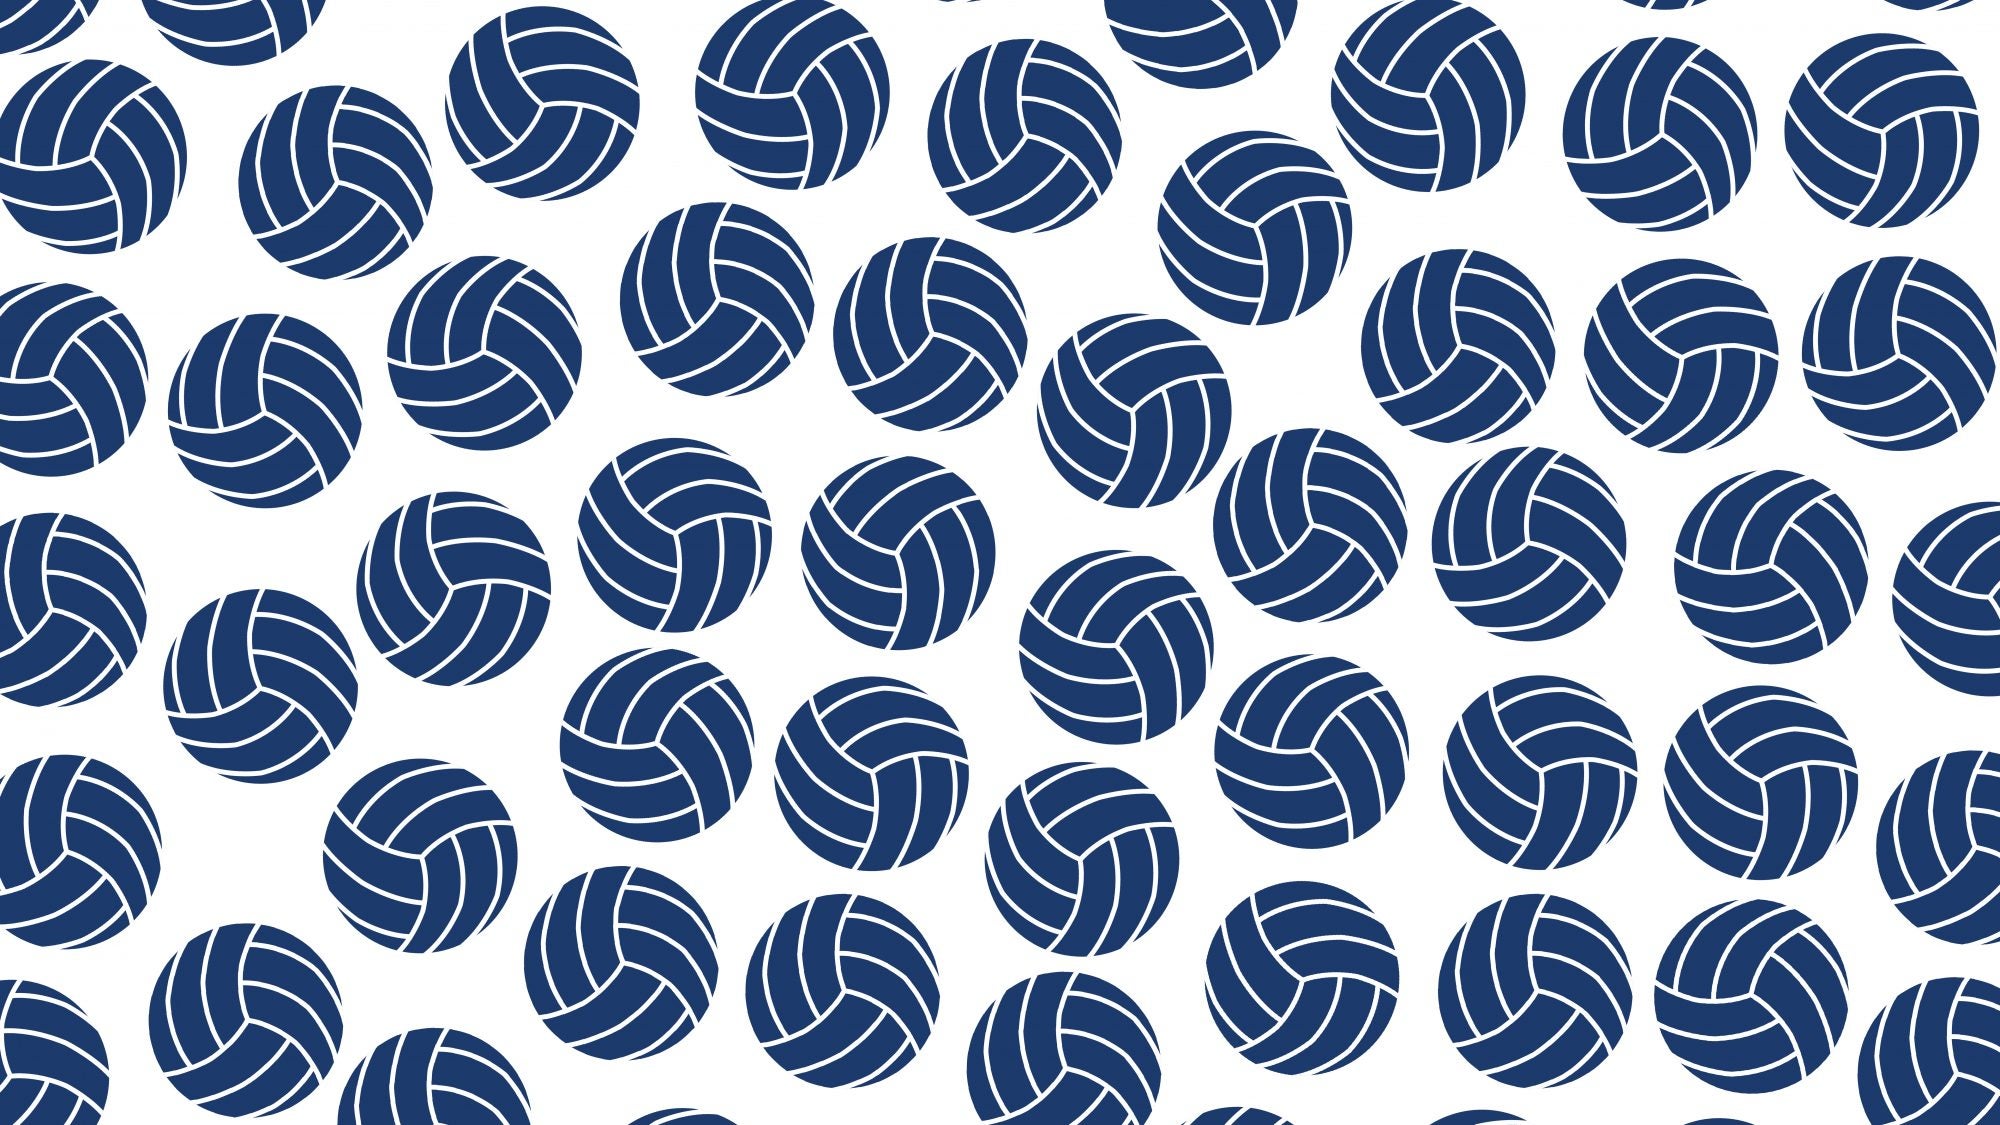 White graphic with a dark blue volleyball illustration pattern.